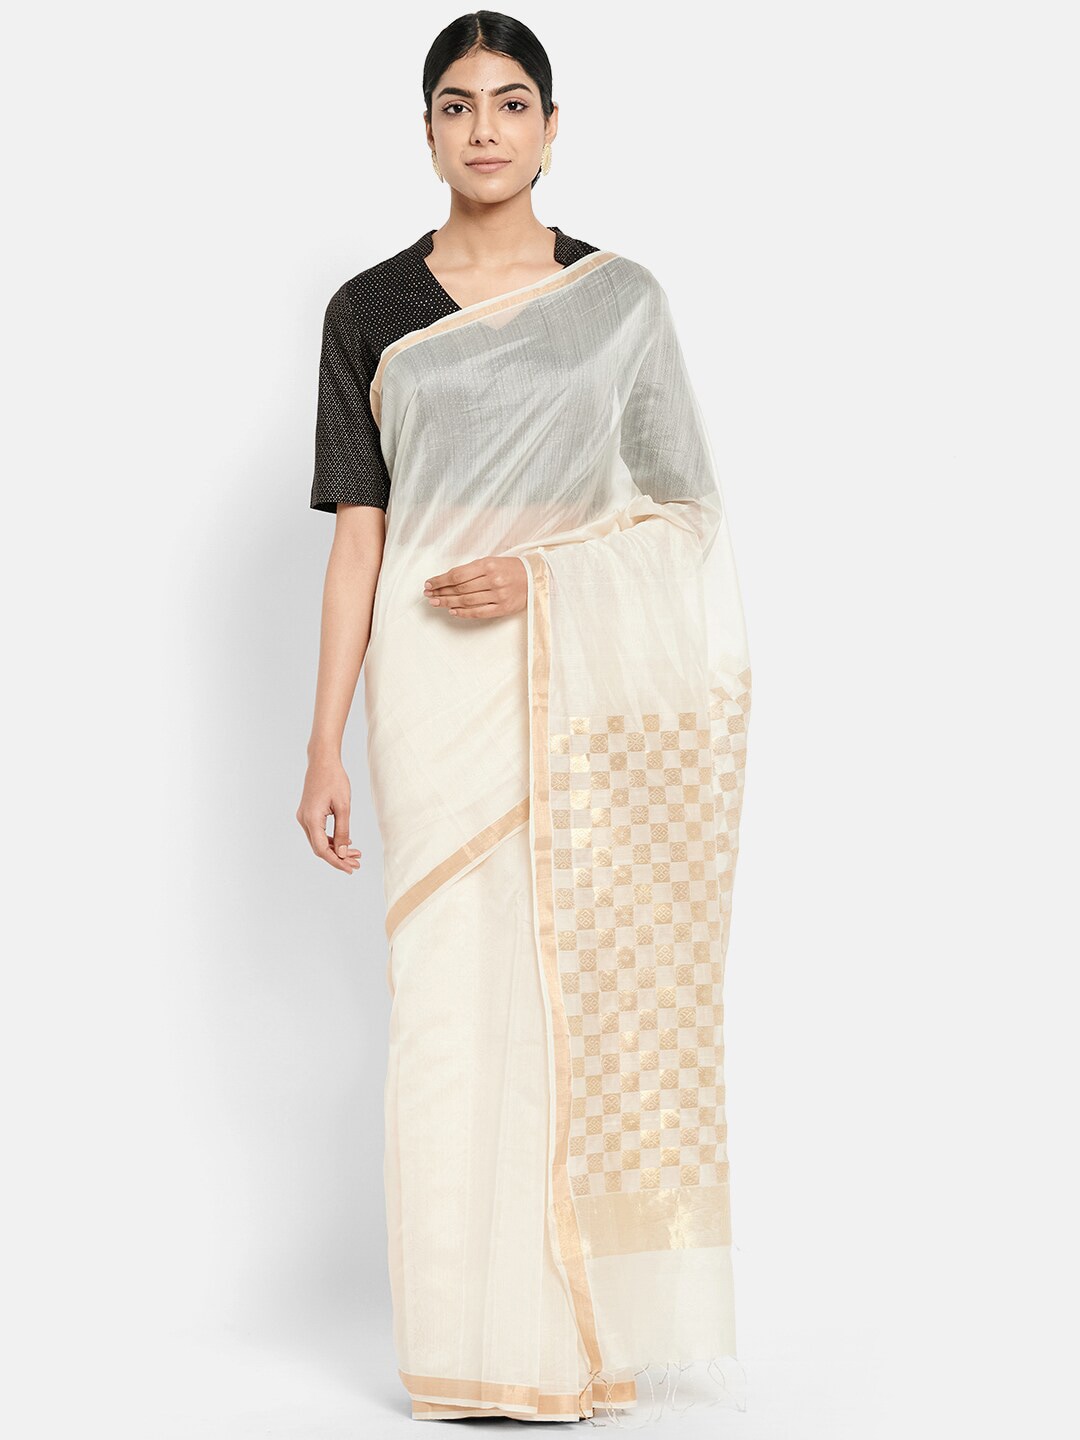 Buy Fabindia Women's Hand Woven Cotton Saree Pink at Amazon.in